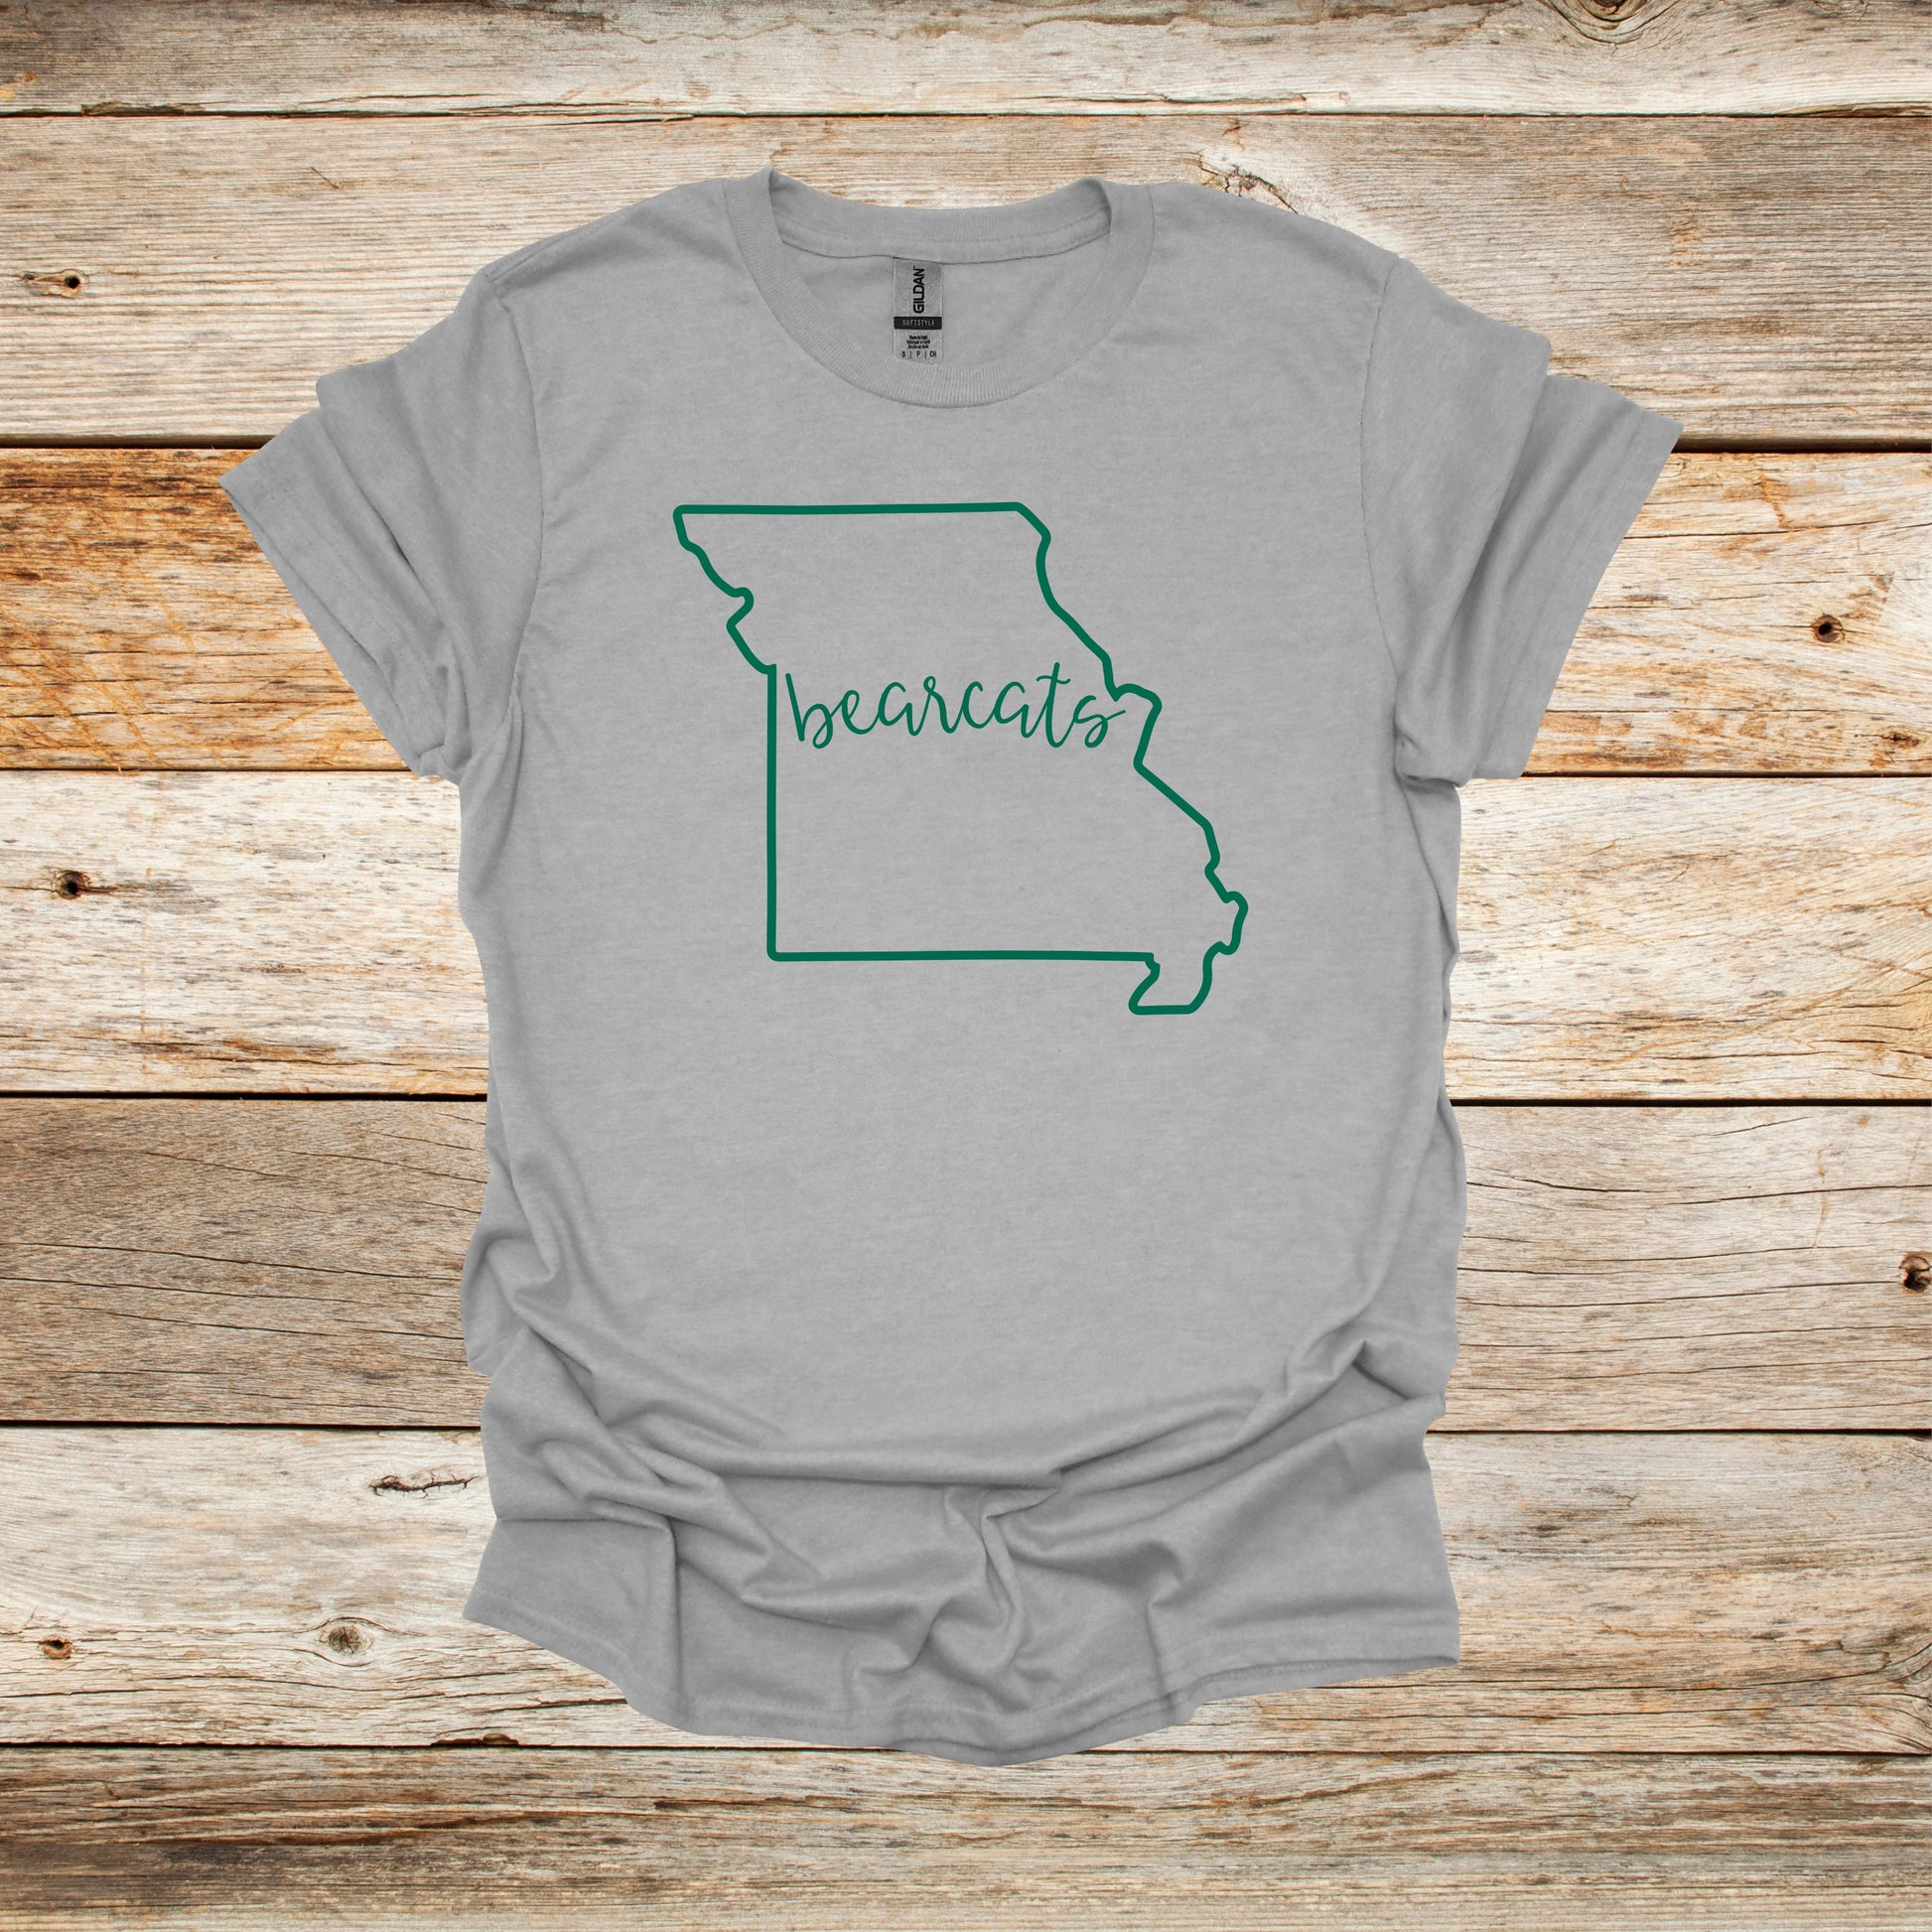 College T Shirt - Northwest Missouri State University Bearcats - State Outline - Adult and Children's Tee Shirts T-Shirts Graphic Avenue Sport Grey Adult Small 